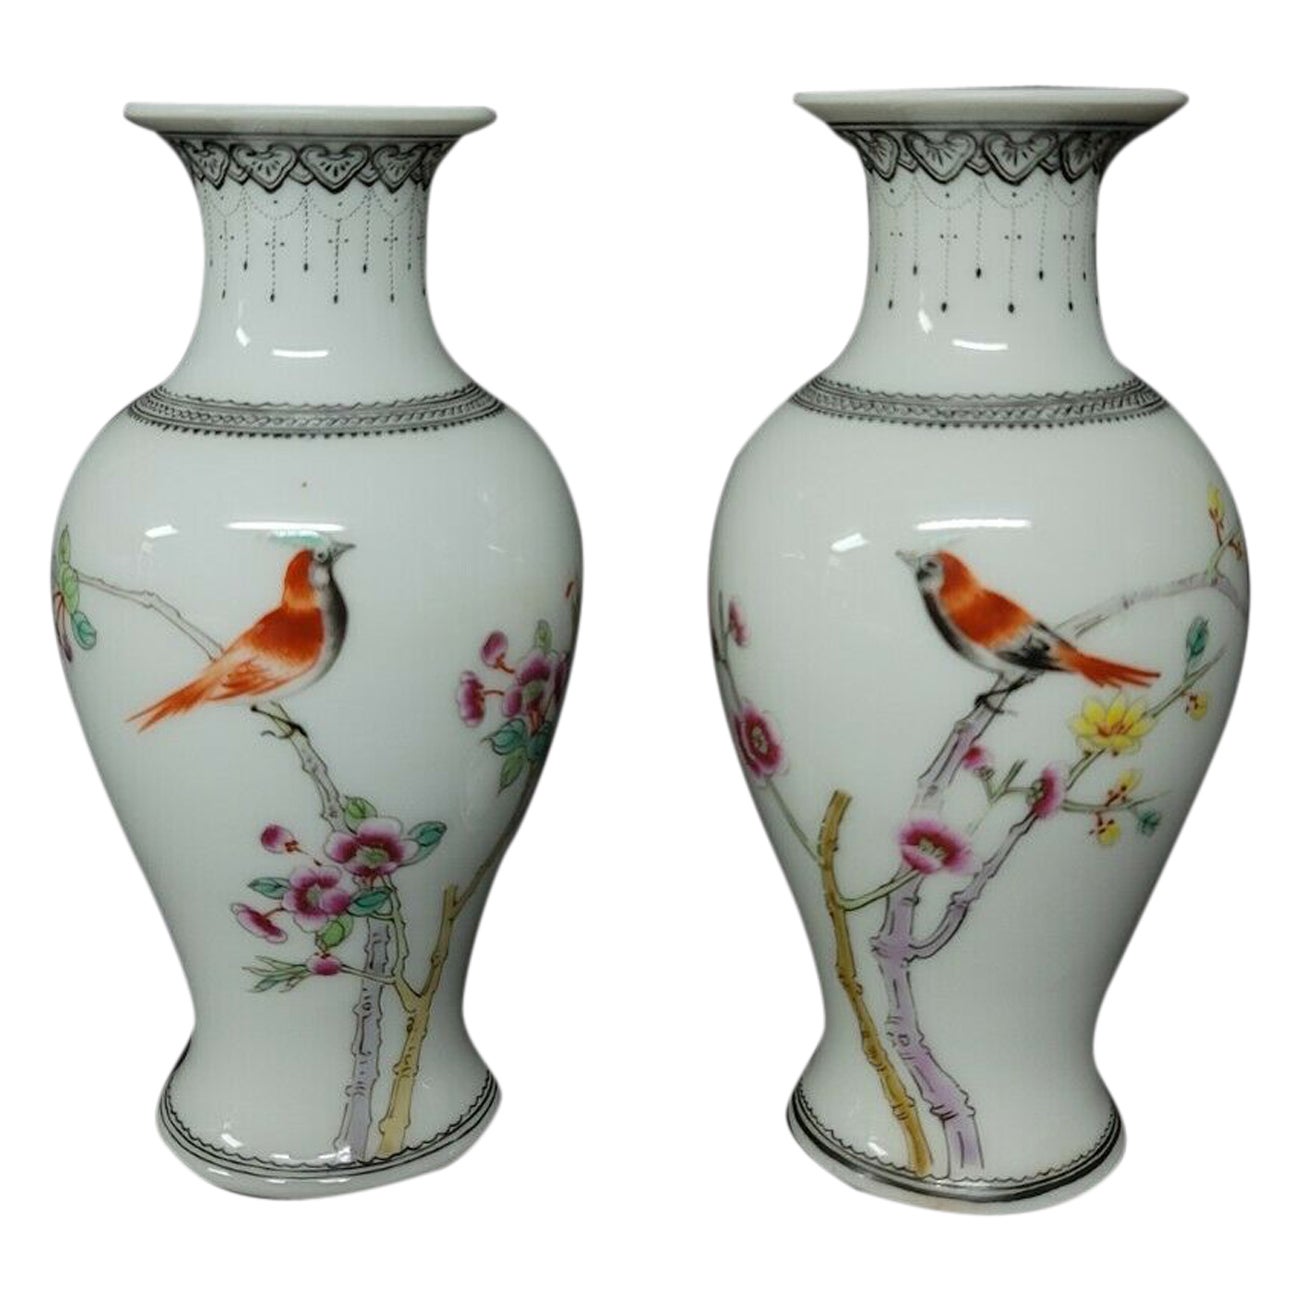 Small Matching Pair of Famille Rose Chinese Famille Rose Porcelain Vases